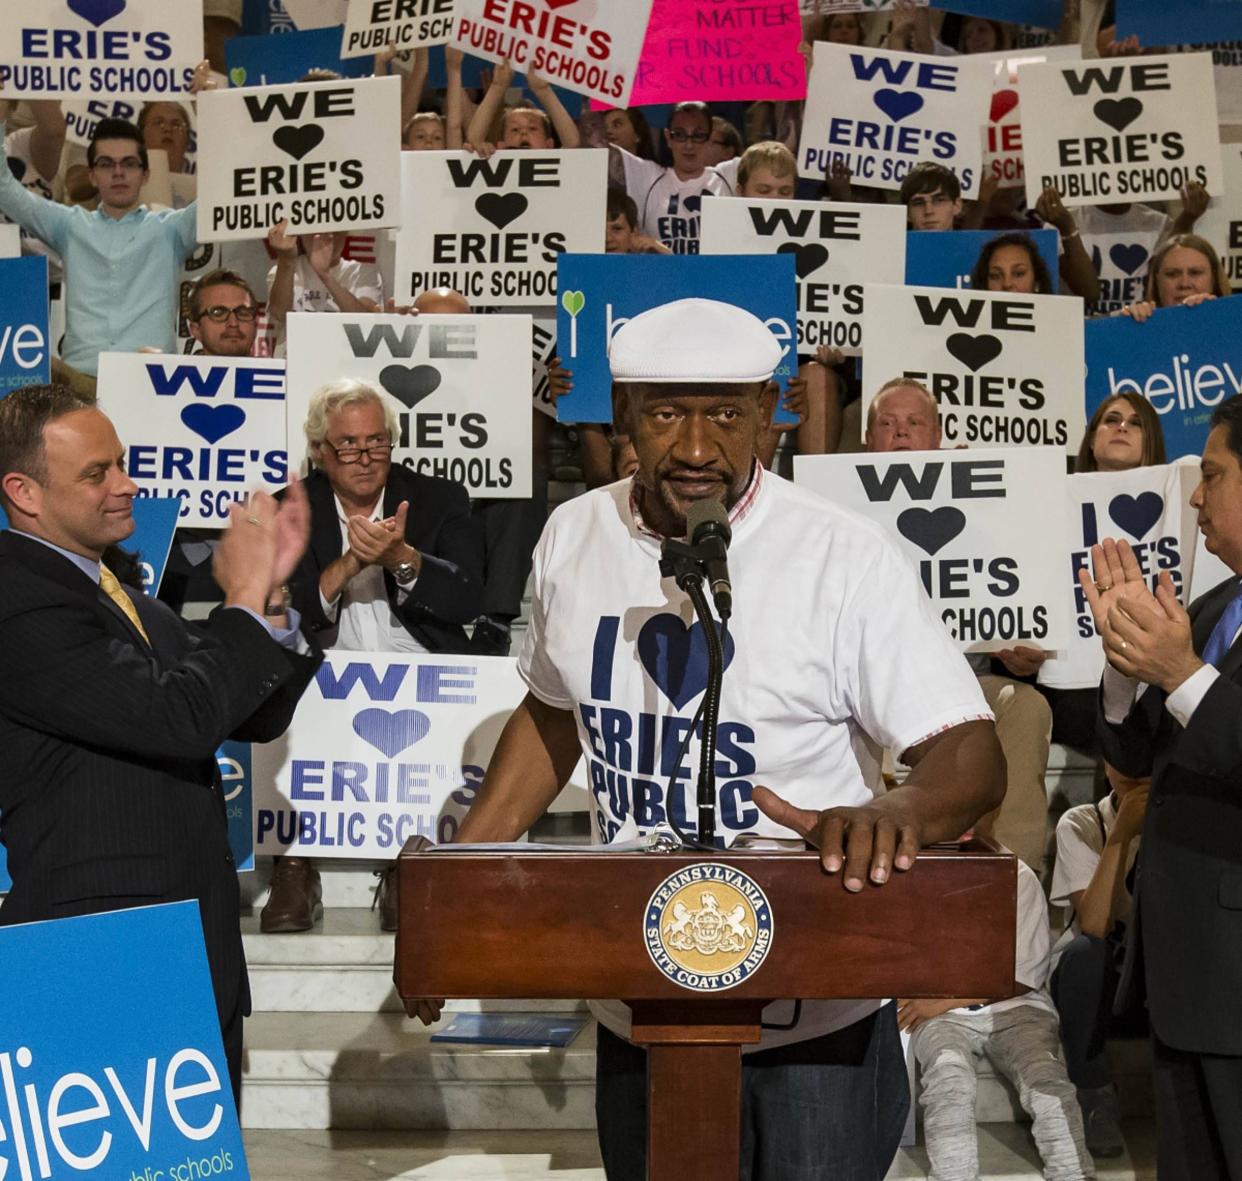 Daryl Craig addresses a rally June 7, 2016, in the state Capitol Rotunda in Harrisburg. A crowd estimated by district officials of about 100 people traveled from Erie for a rally in support of more state funding for the Erie School District which faced a multi-million dollar deficit.